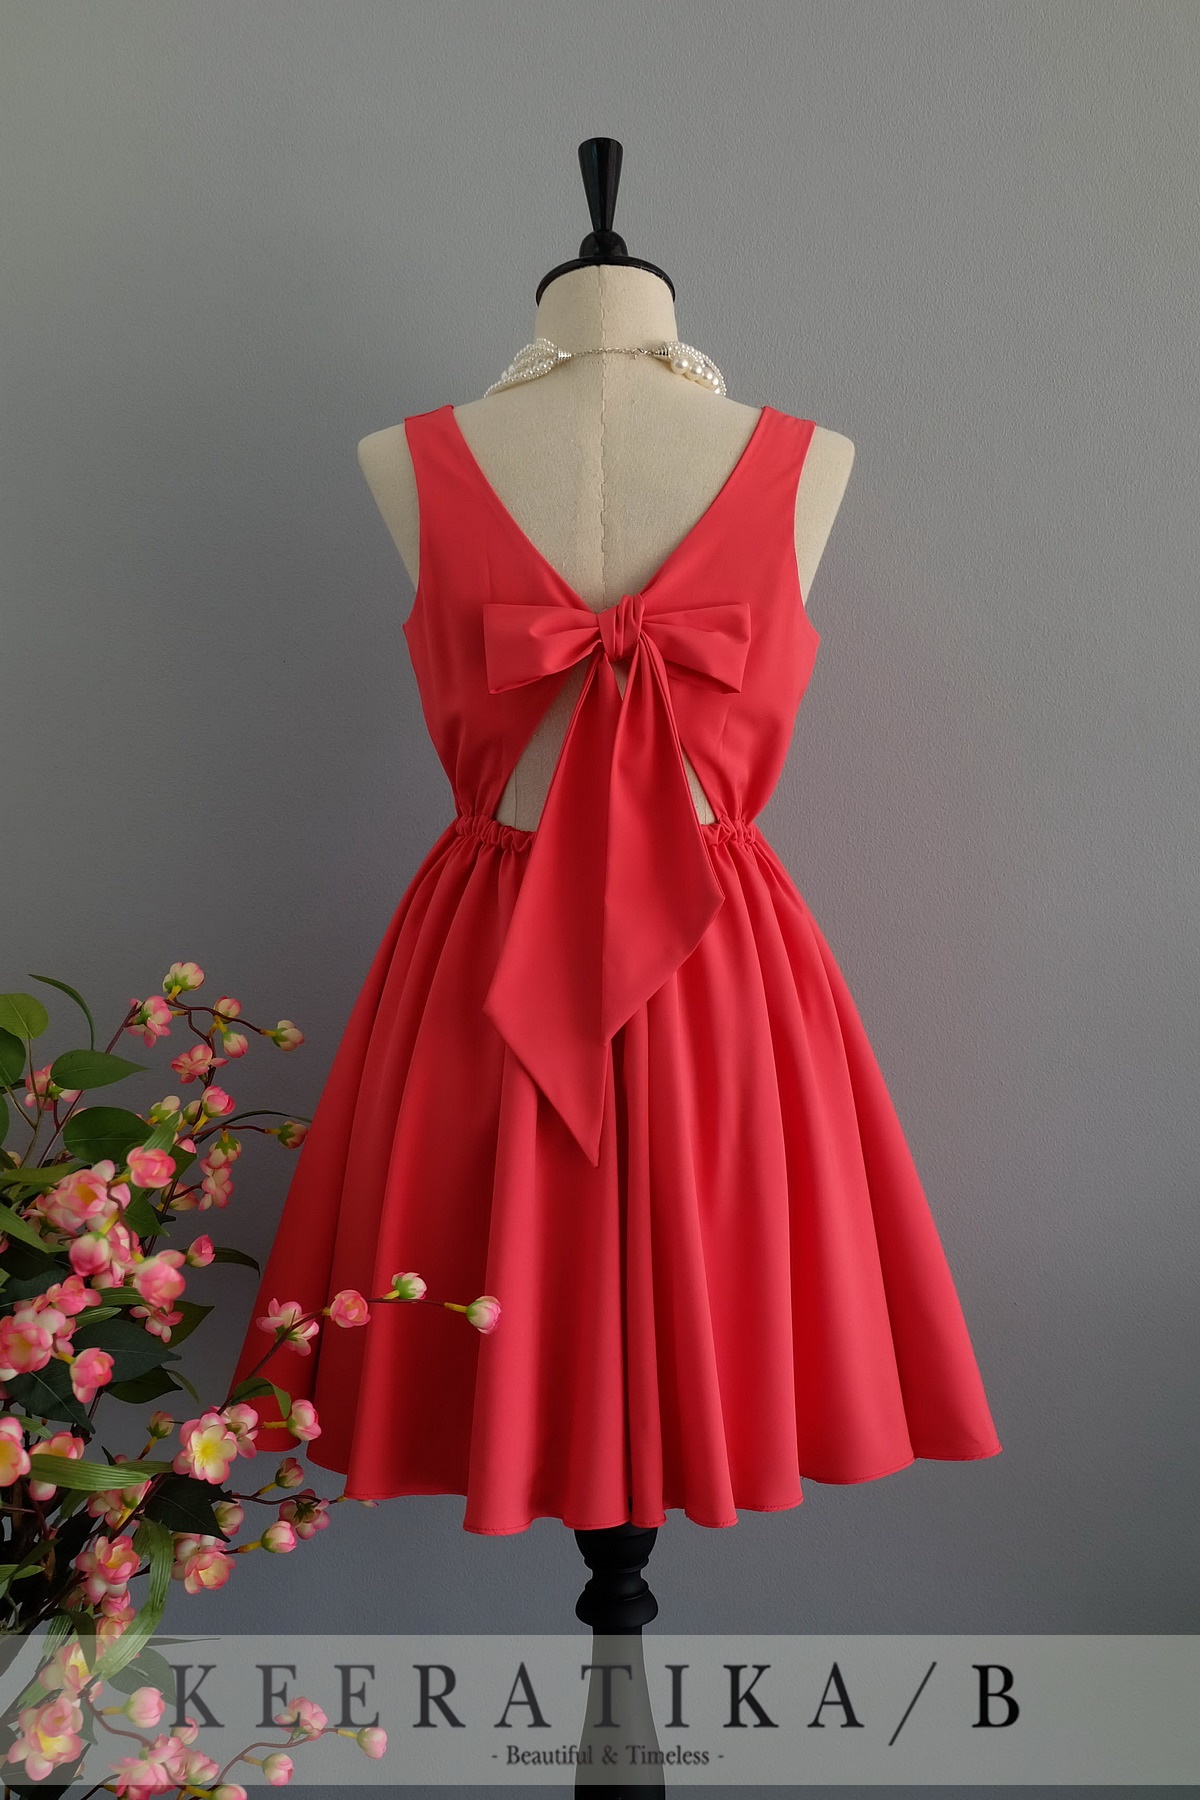 Red Dress Backless Dress Red Party Dress Red Prom Dress Red Cocktail Dress Bow Back Dress Red Bridesmaid Dresses